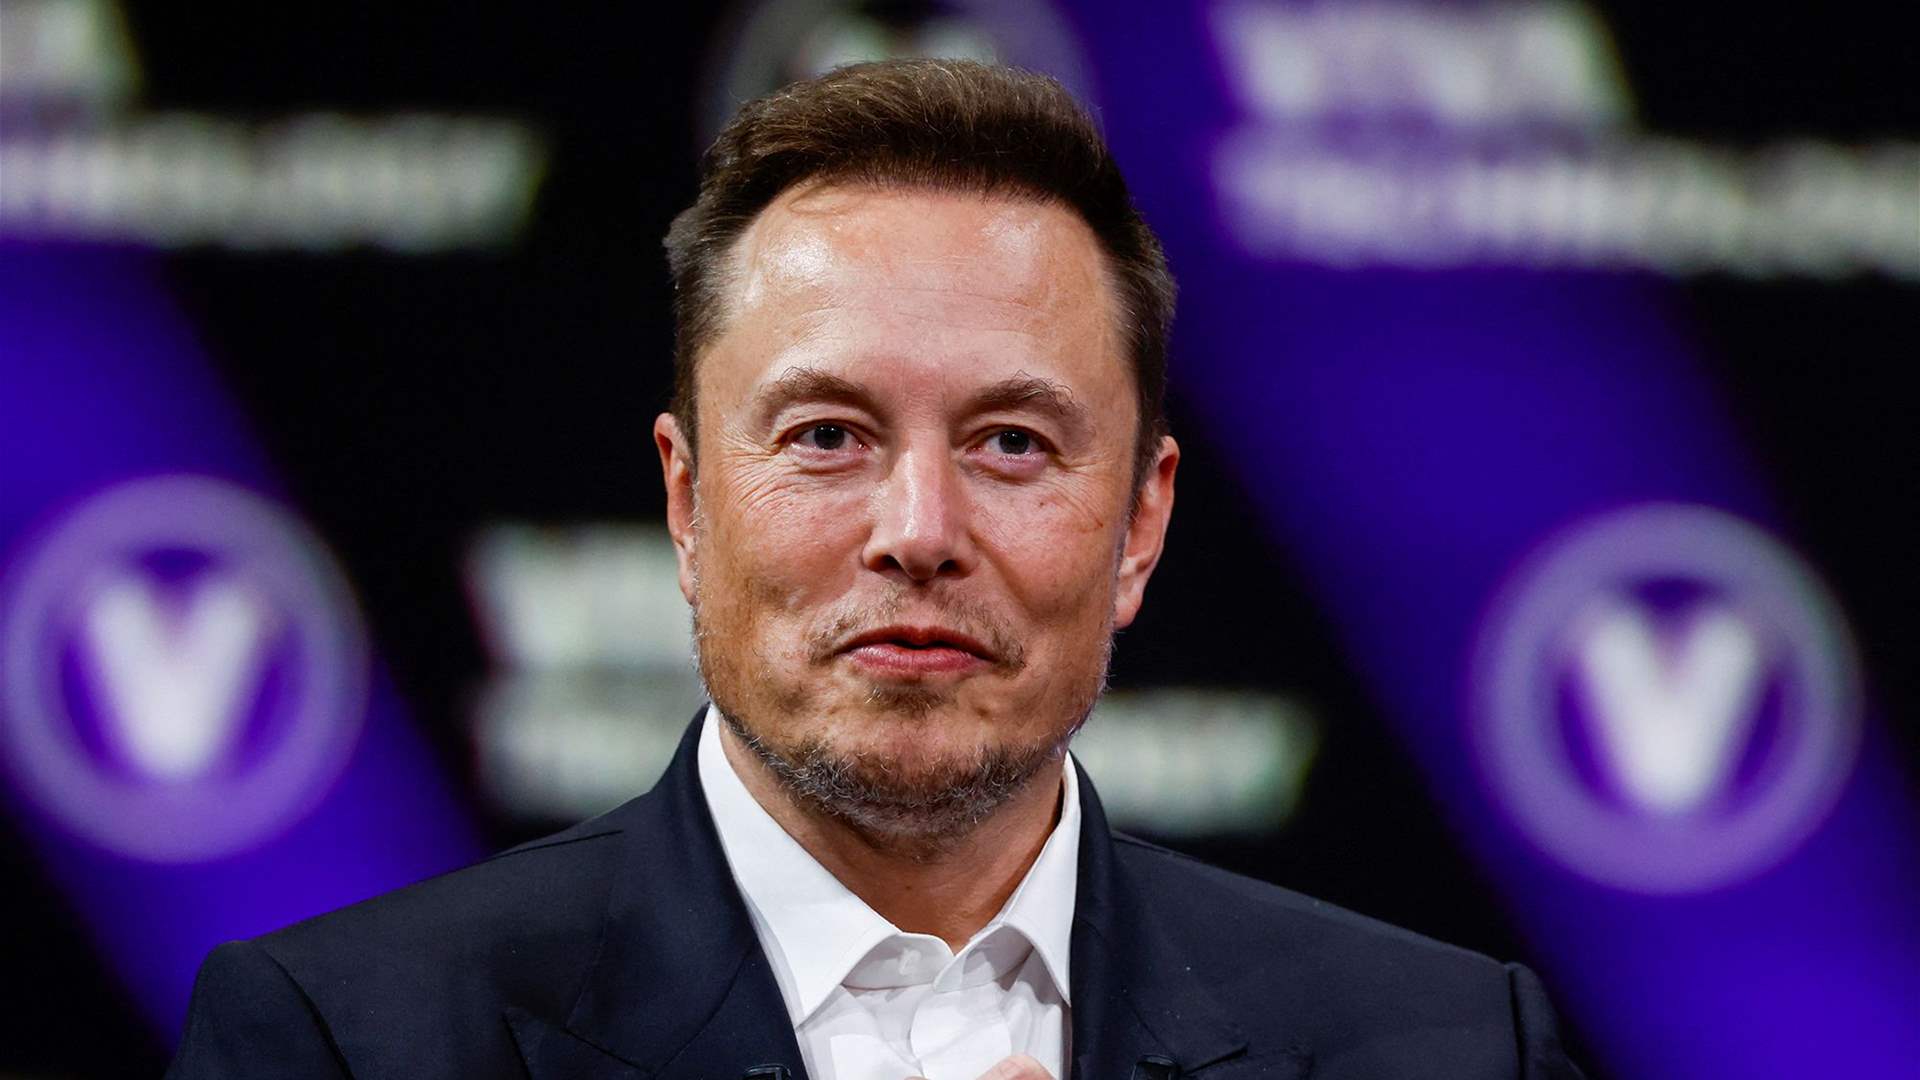 Musk donates to group working to elect Trump